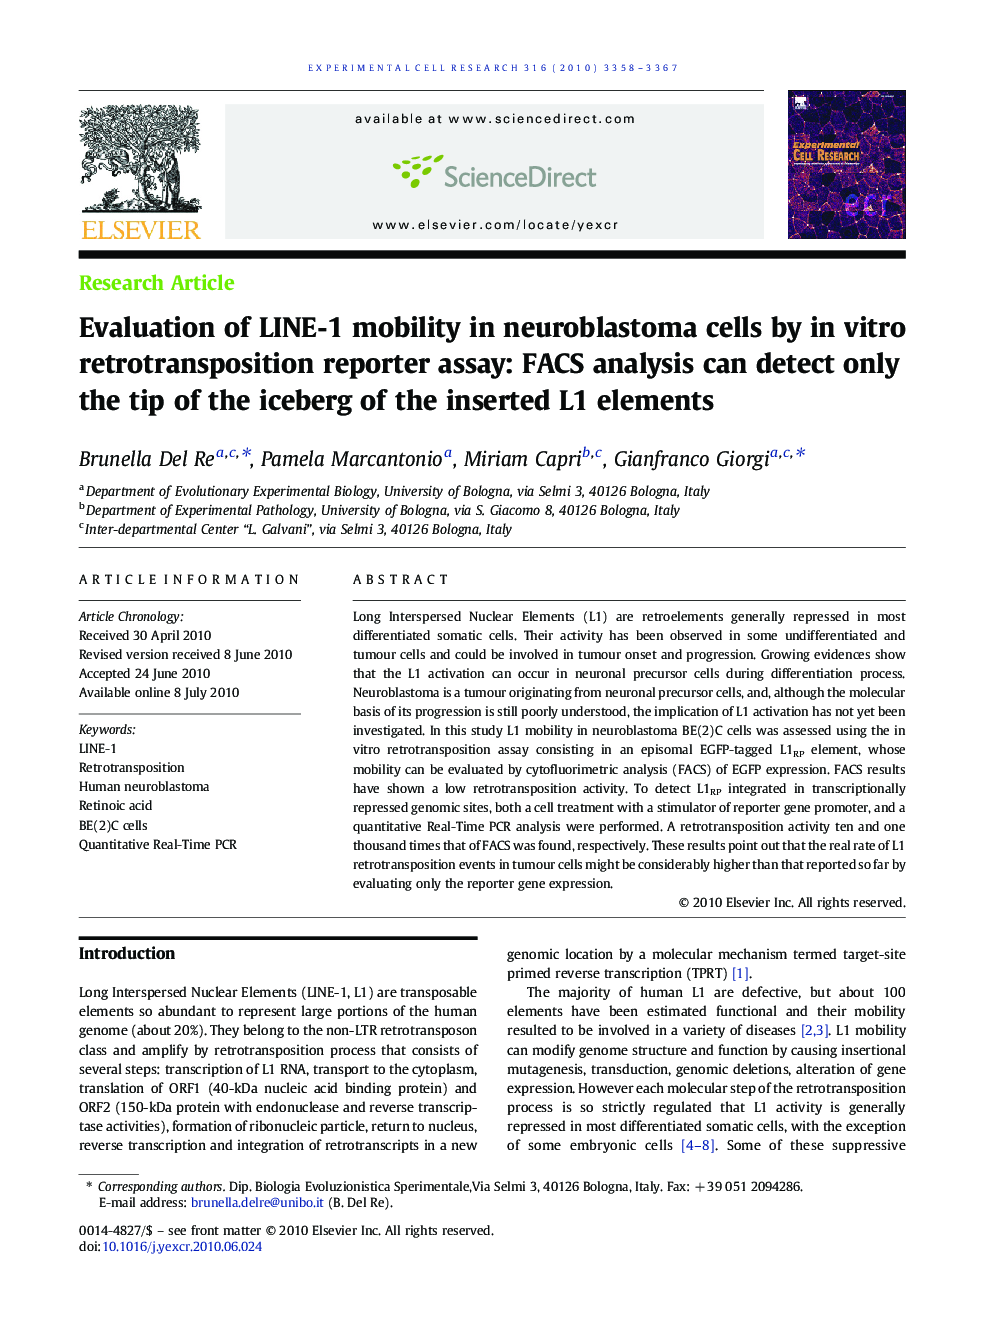 Evaluation of LINE-1 mobility in neuroblastoma cells by in vitro retrotransposition reporter assay: FACS analysis can detect only the tip of the iceberg of the inserted L1 elements